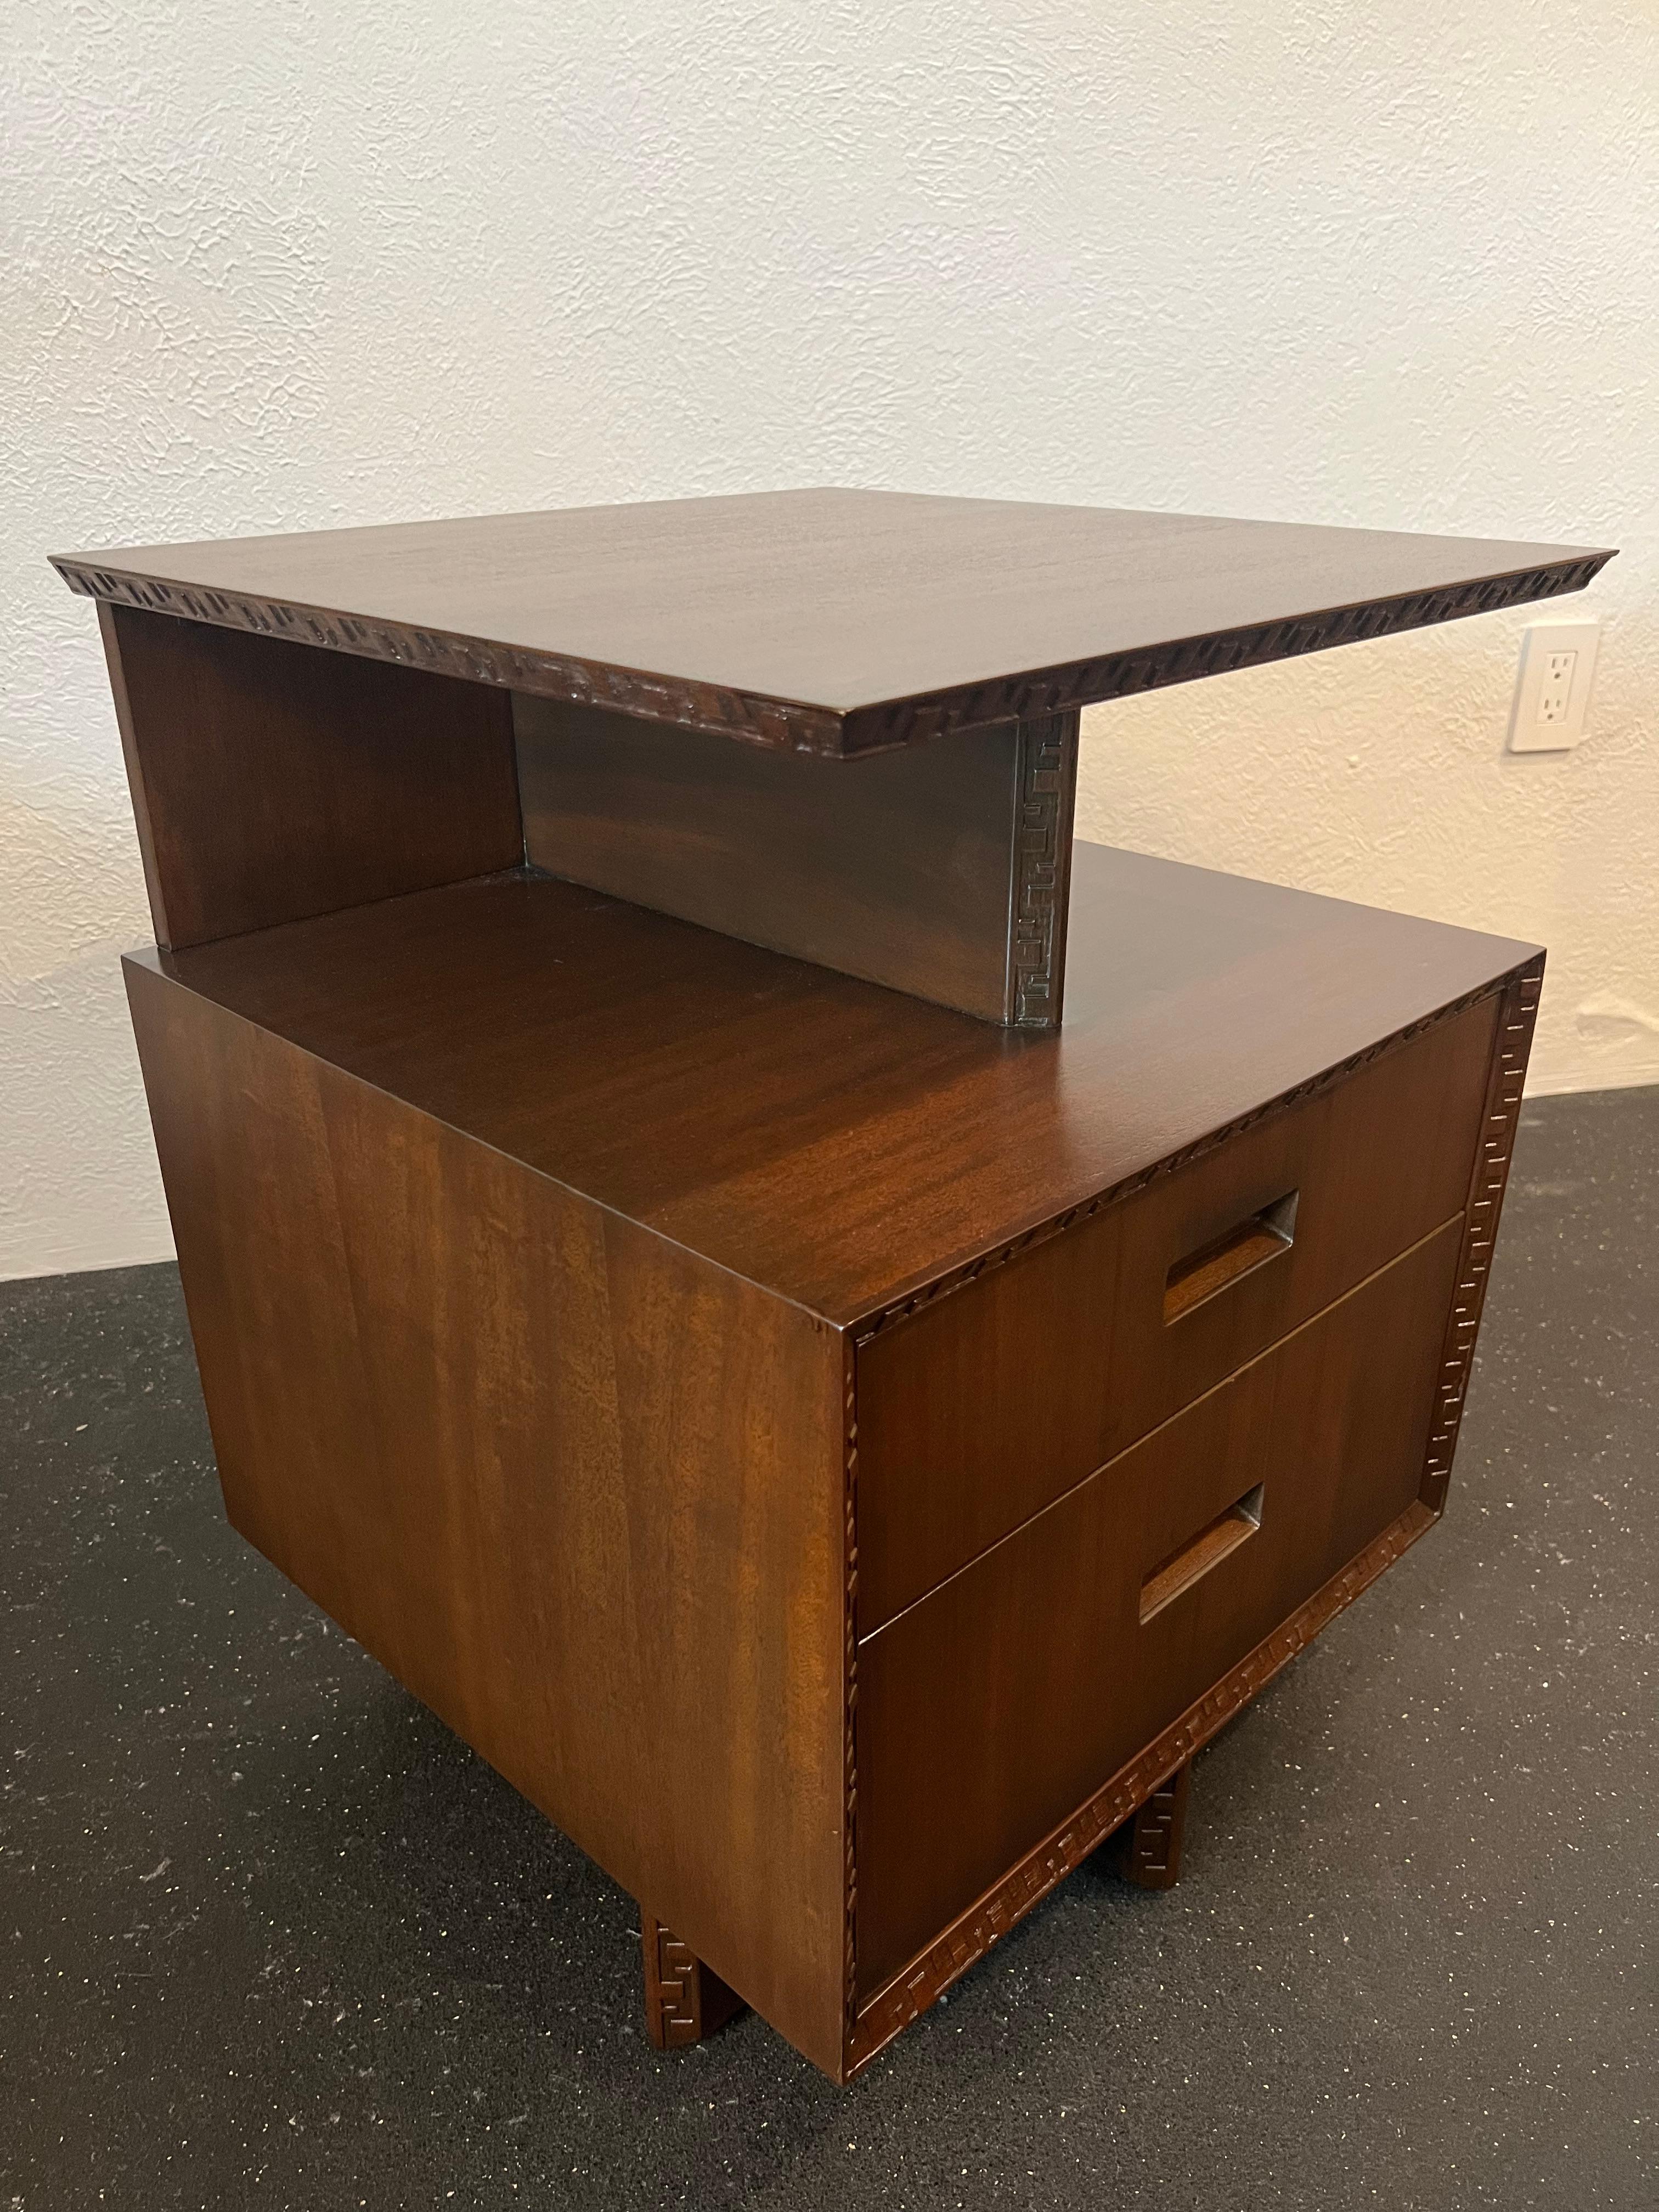 Mid-20th Century Frank Lloyd Wright for Heritage Henredon “Taliesin” Side Table For Sale